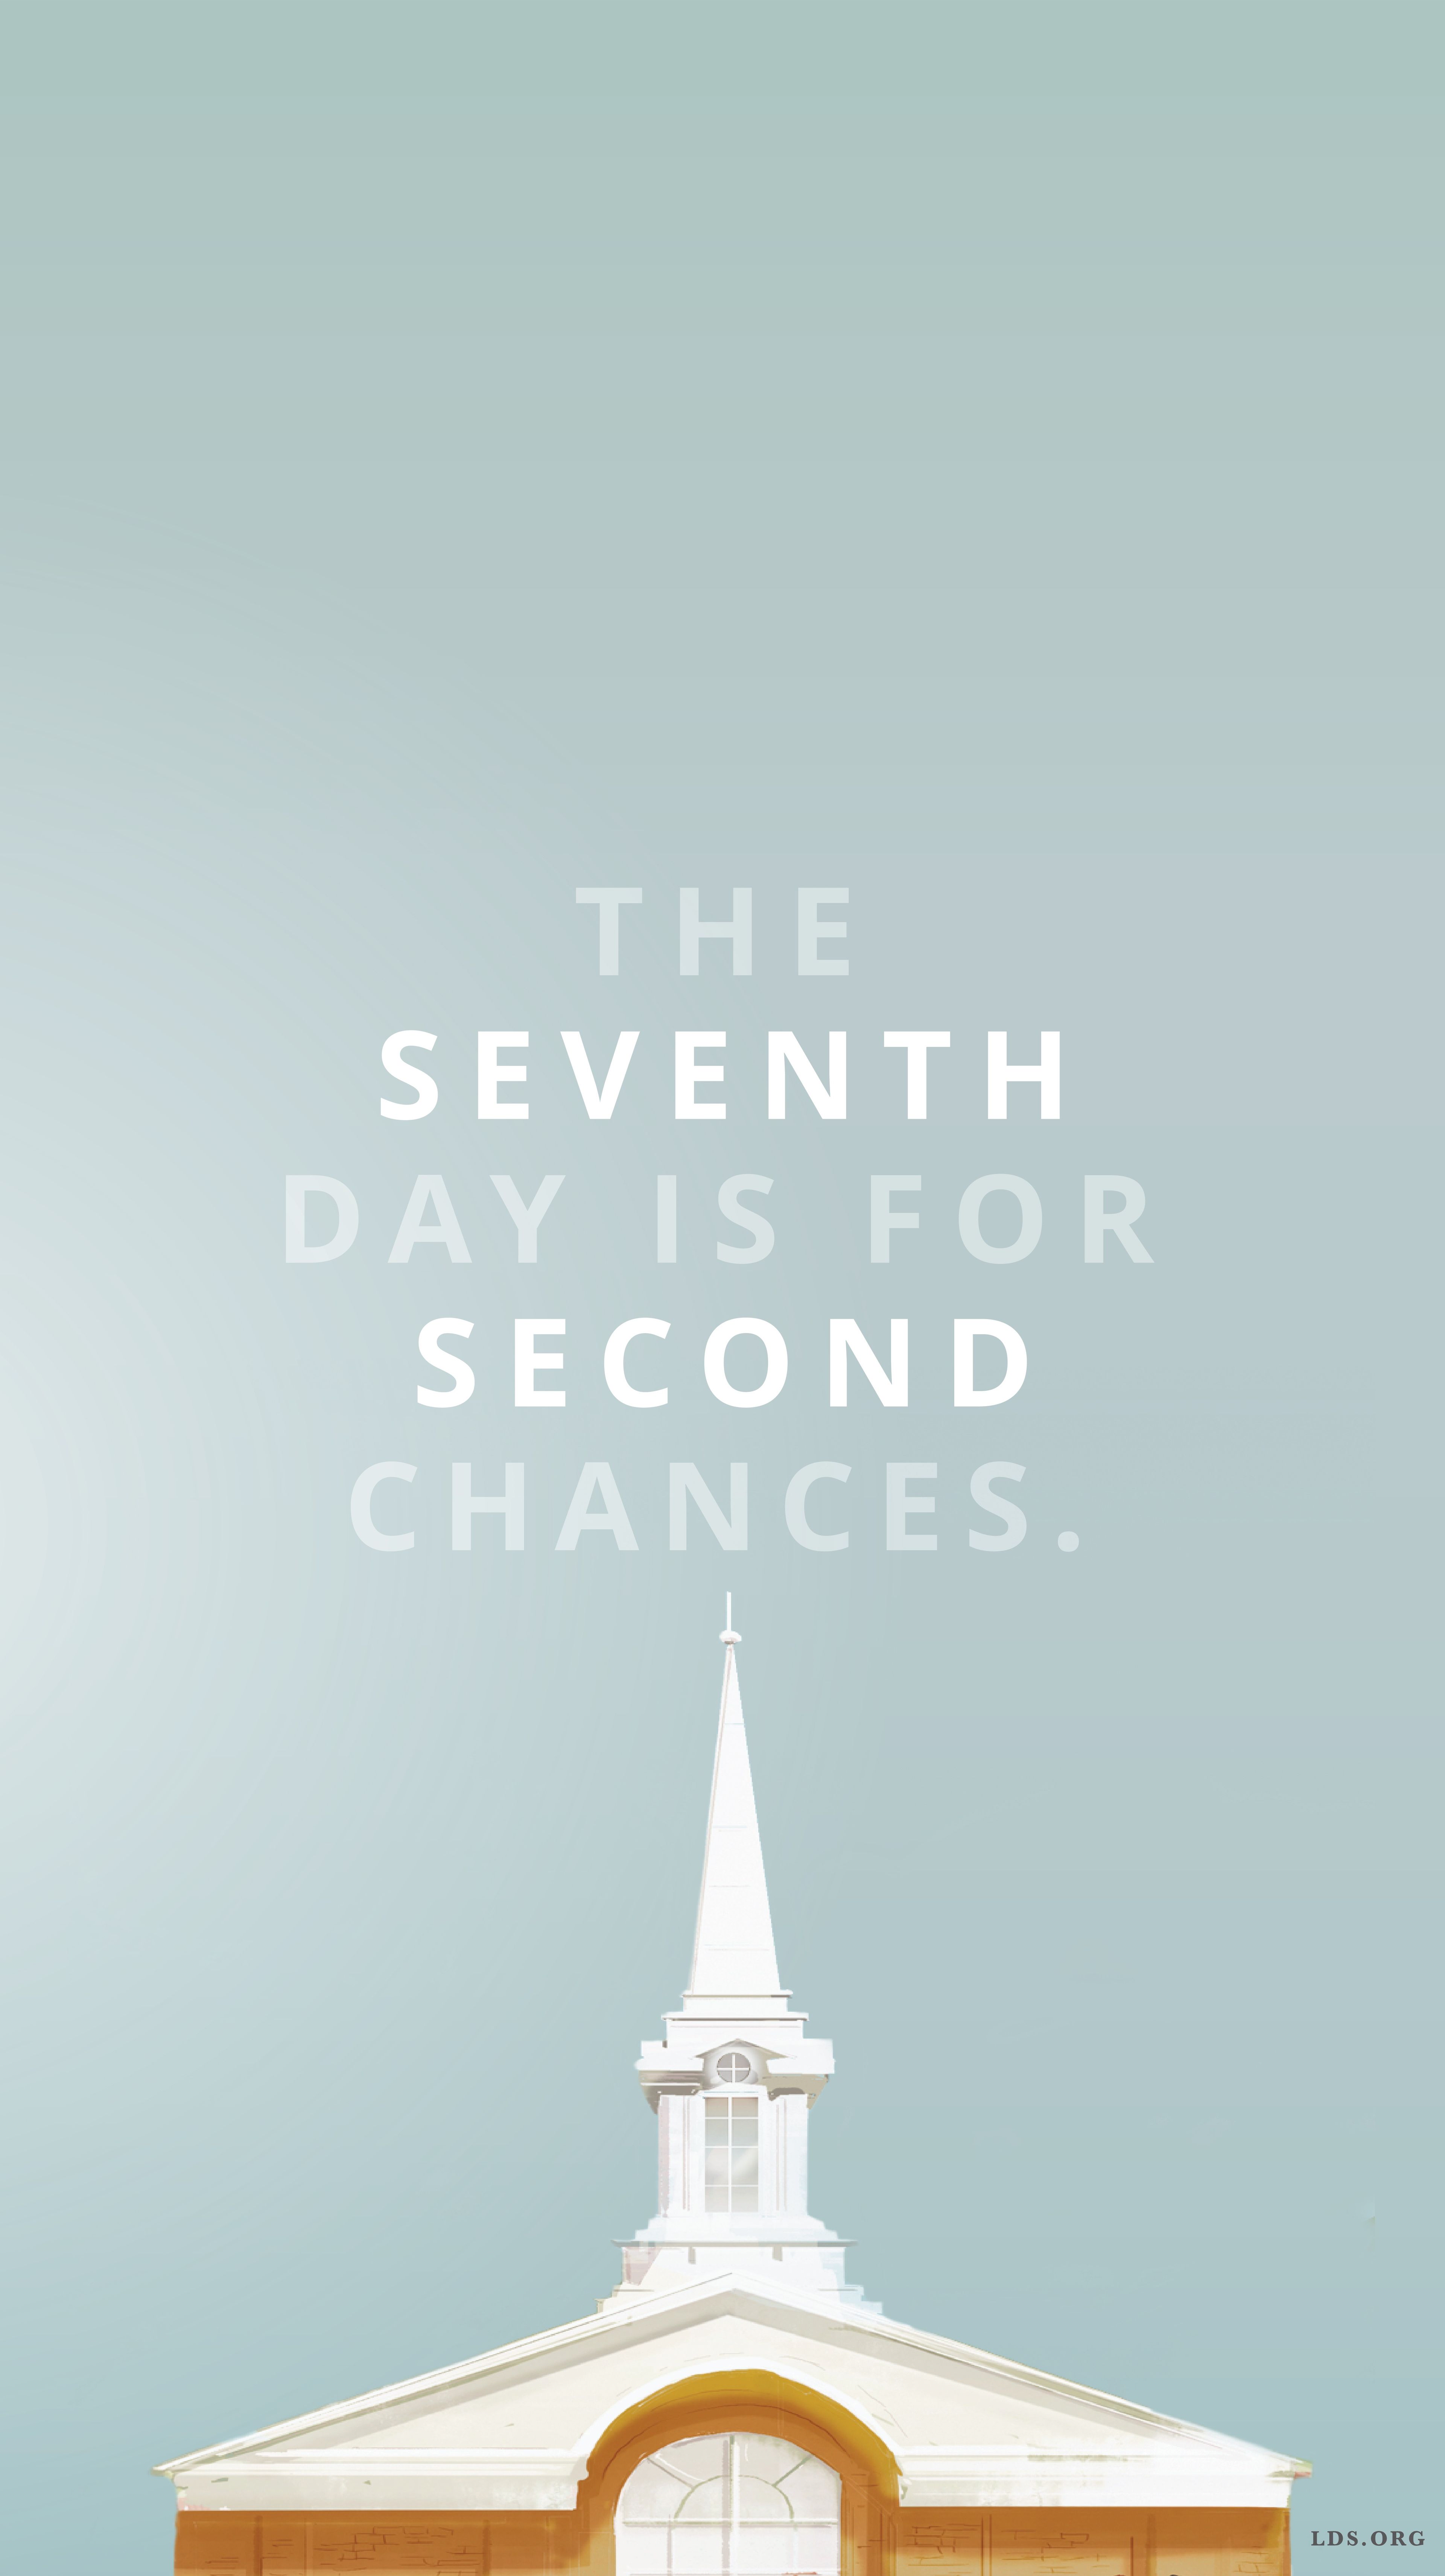 The seventh day is for second chances